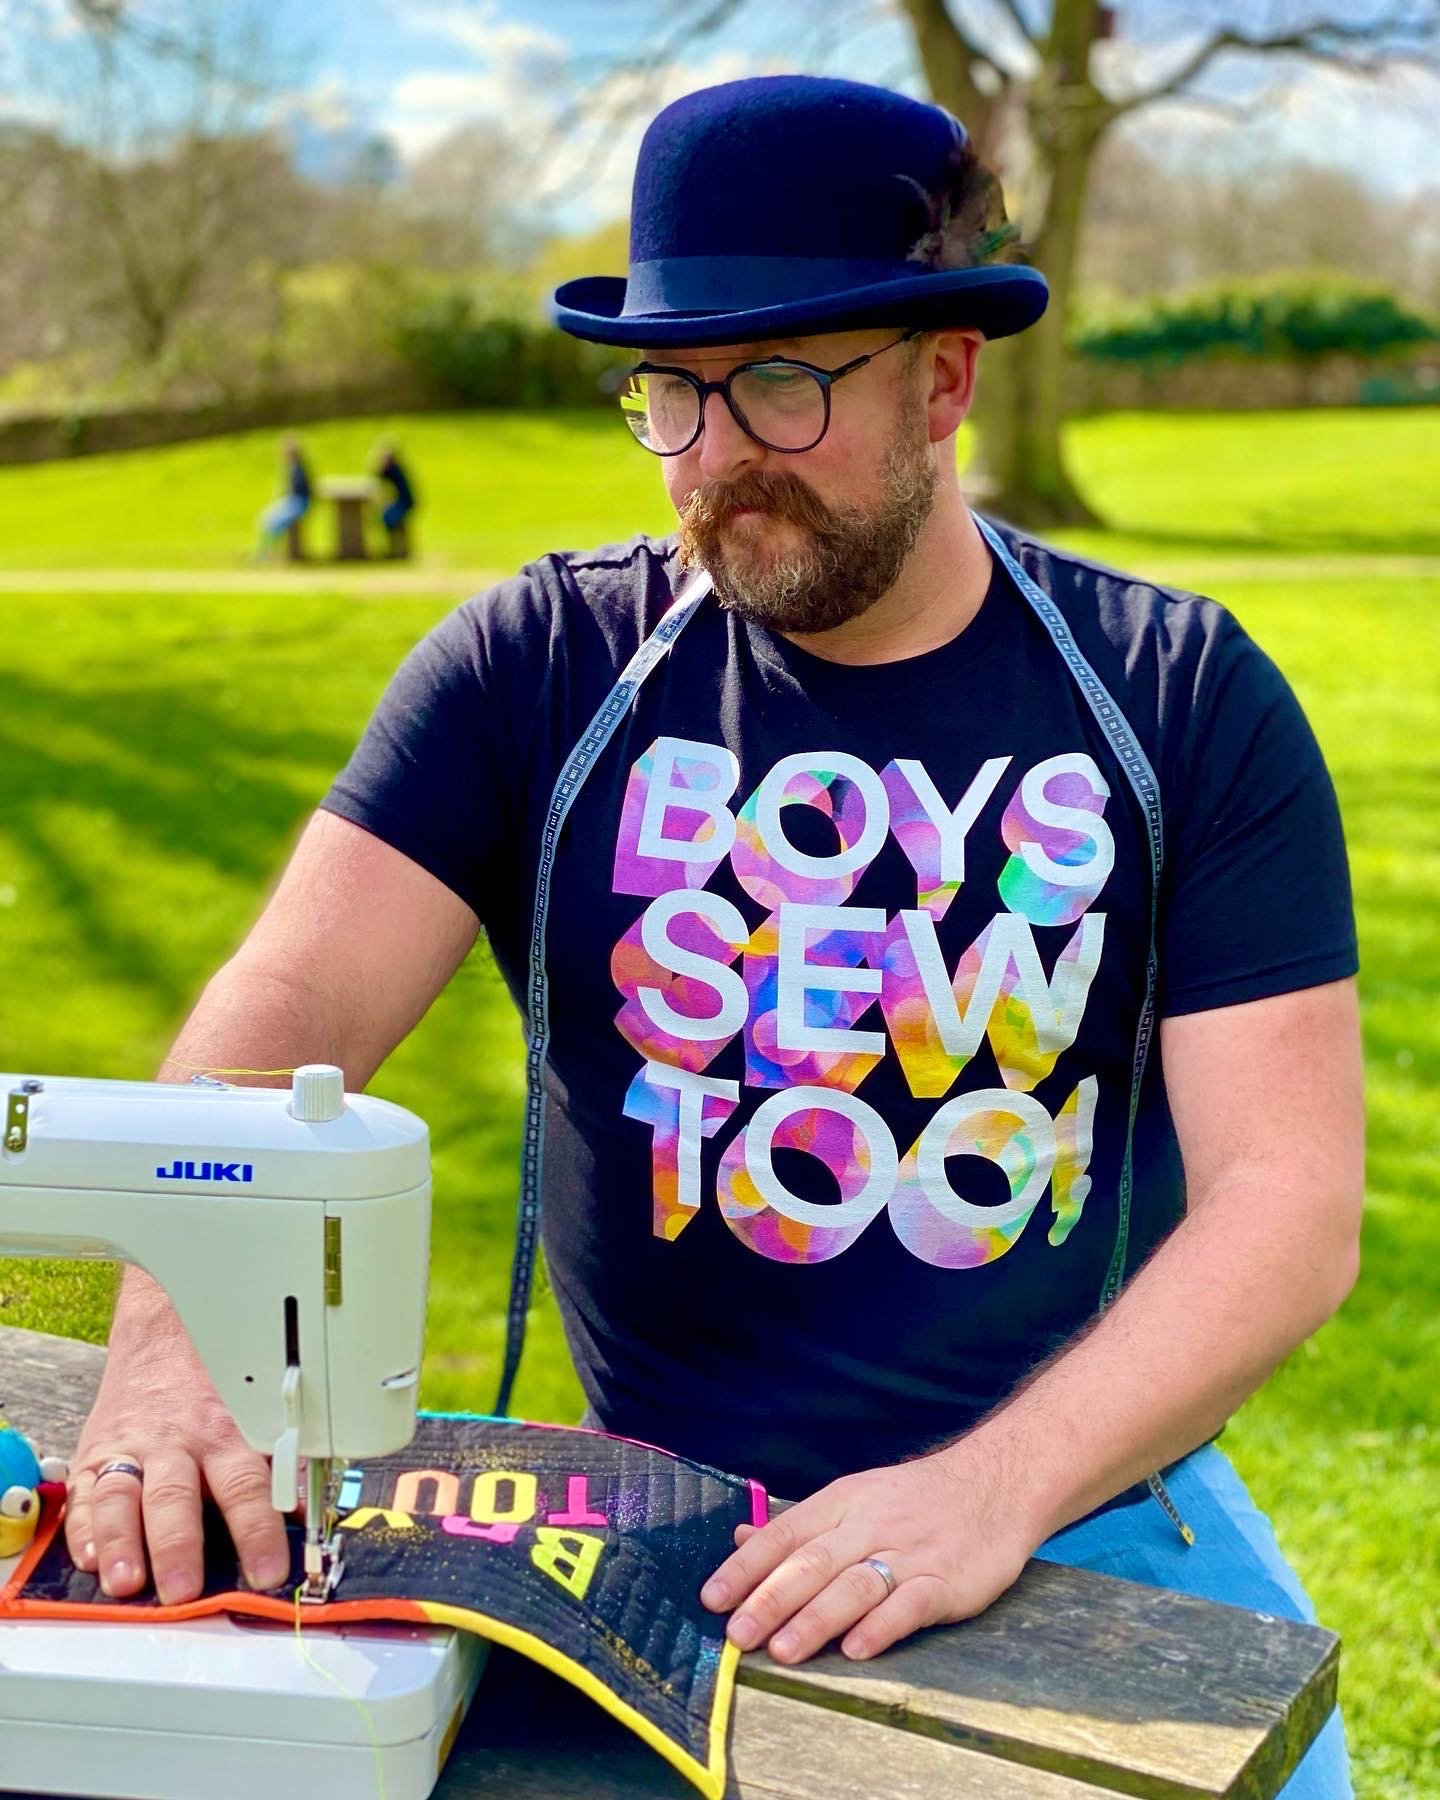 Clive with #boyssewtoo tee machine sewing in a park